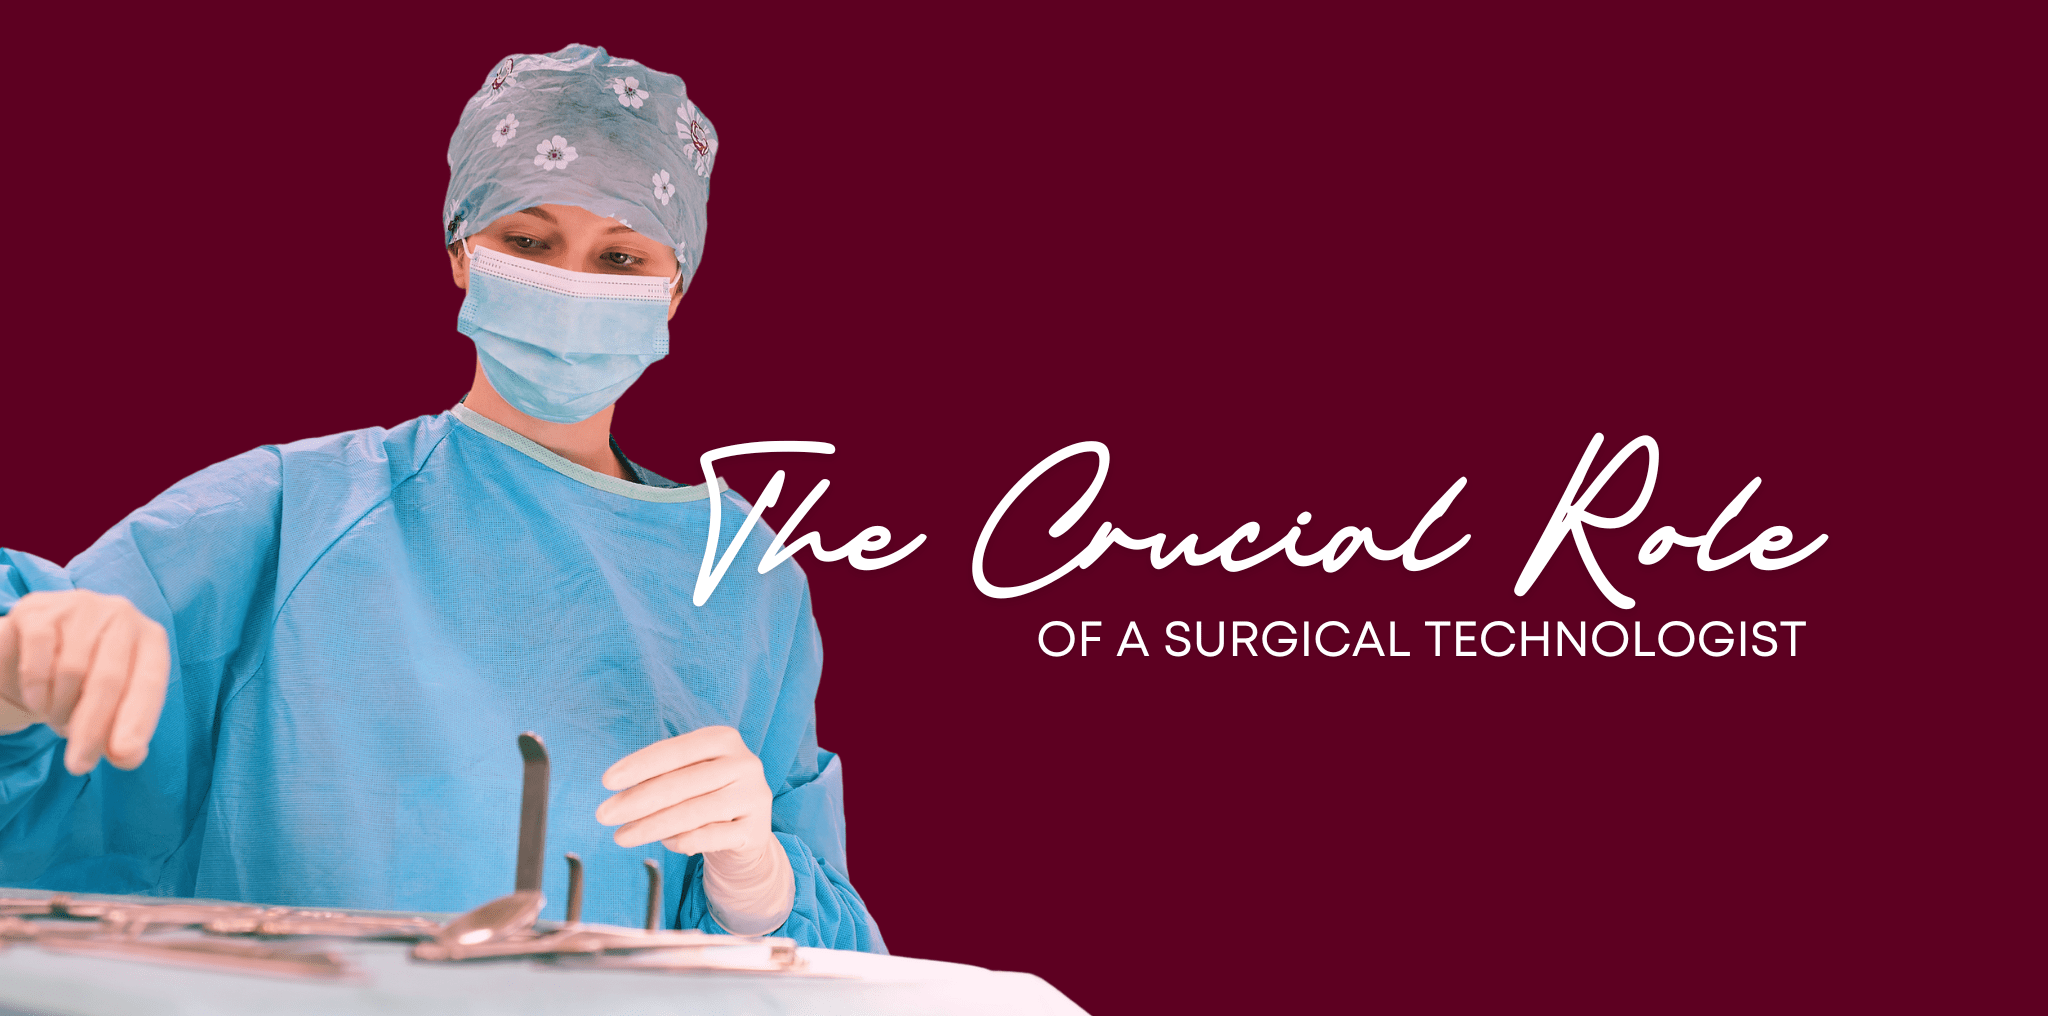 Surgical technologist in scrubs prepares surgical instruments. Text reads: The Crucial Role of a Surgical Technologist.